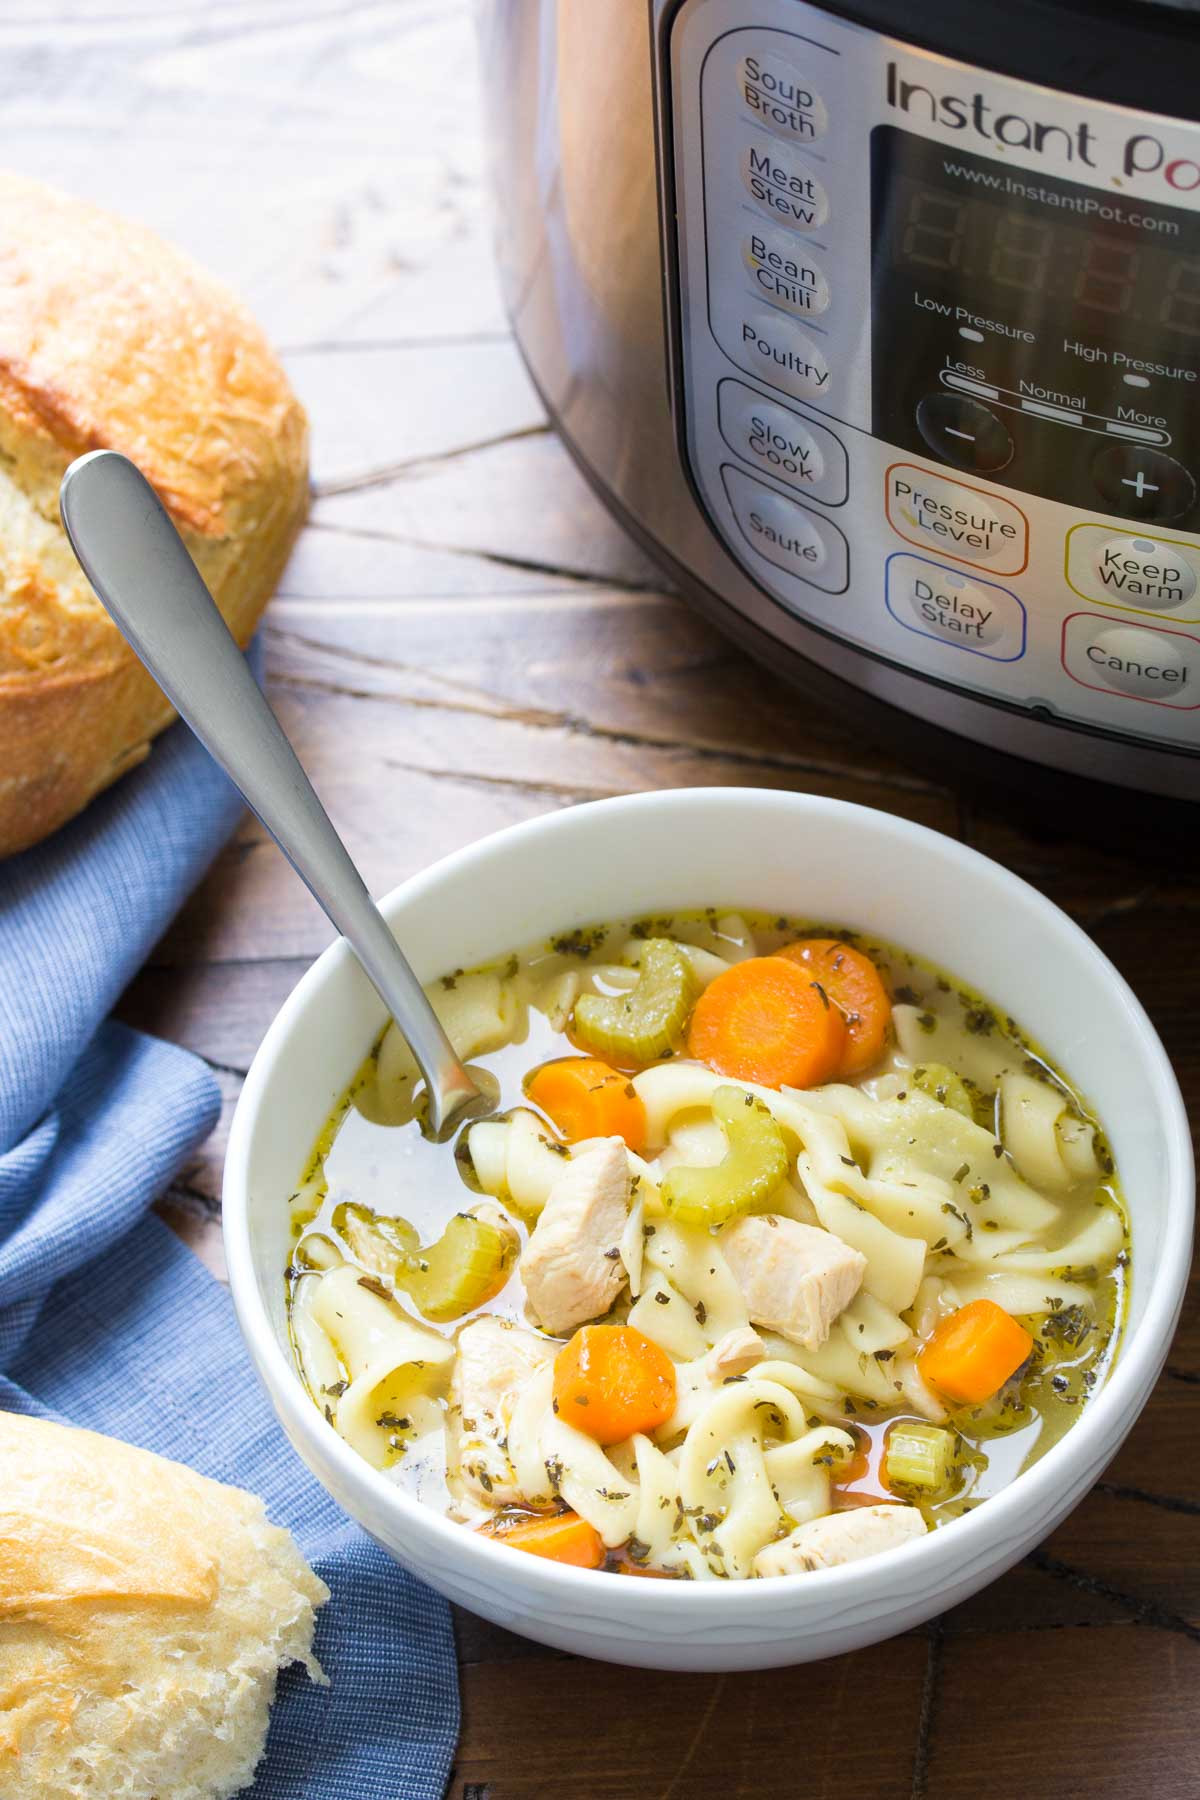 15 Of the Best Ideas for Instant Pot Chicken soup